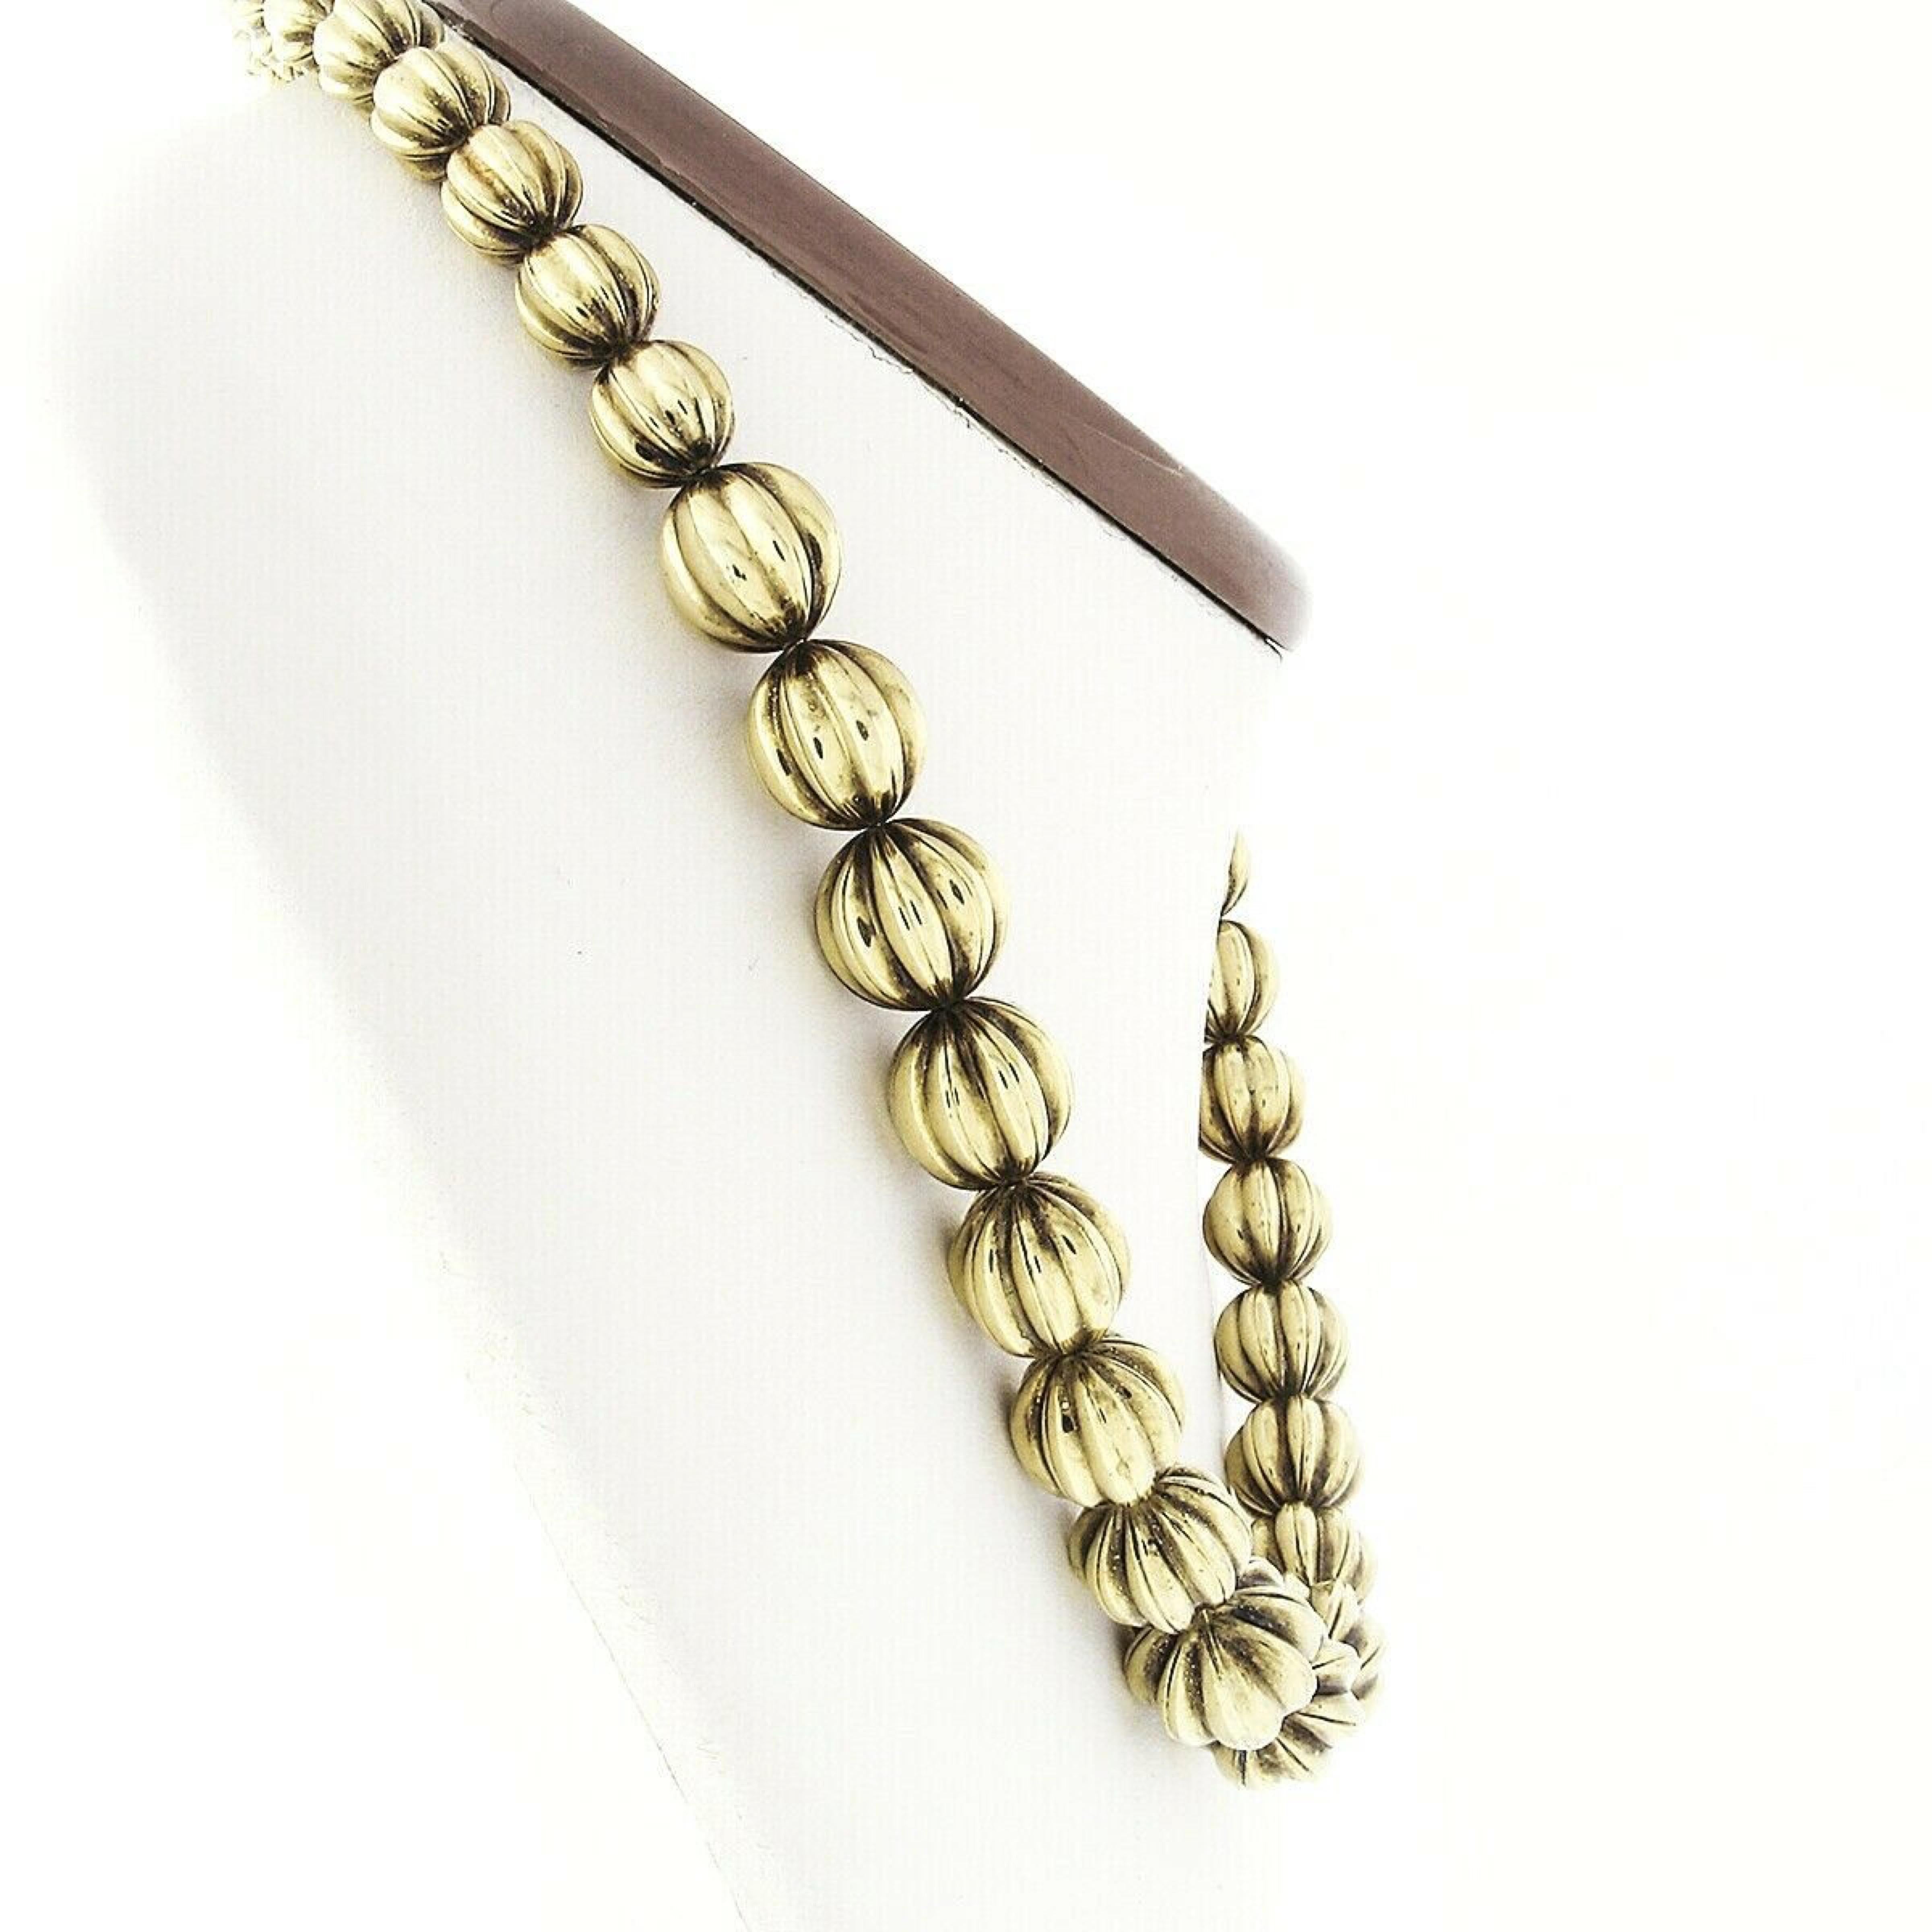 Here we have a gorgeous vintage necklace that was crafted in Italy from solid 14k yellow gold. It features 38 grooved and puffed gold ball beads that graduate in size from approximately 8.45mm at the back to approximately 13mm at the front. The